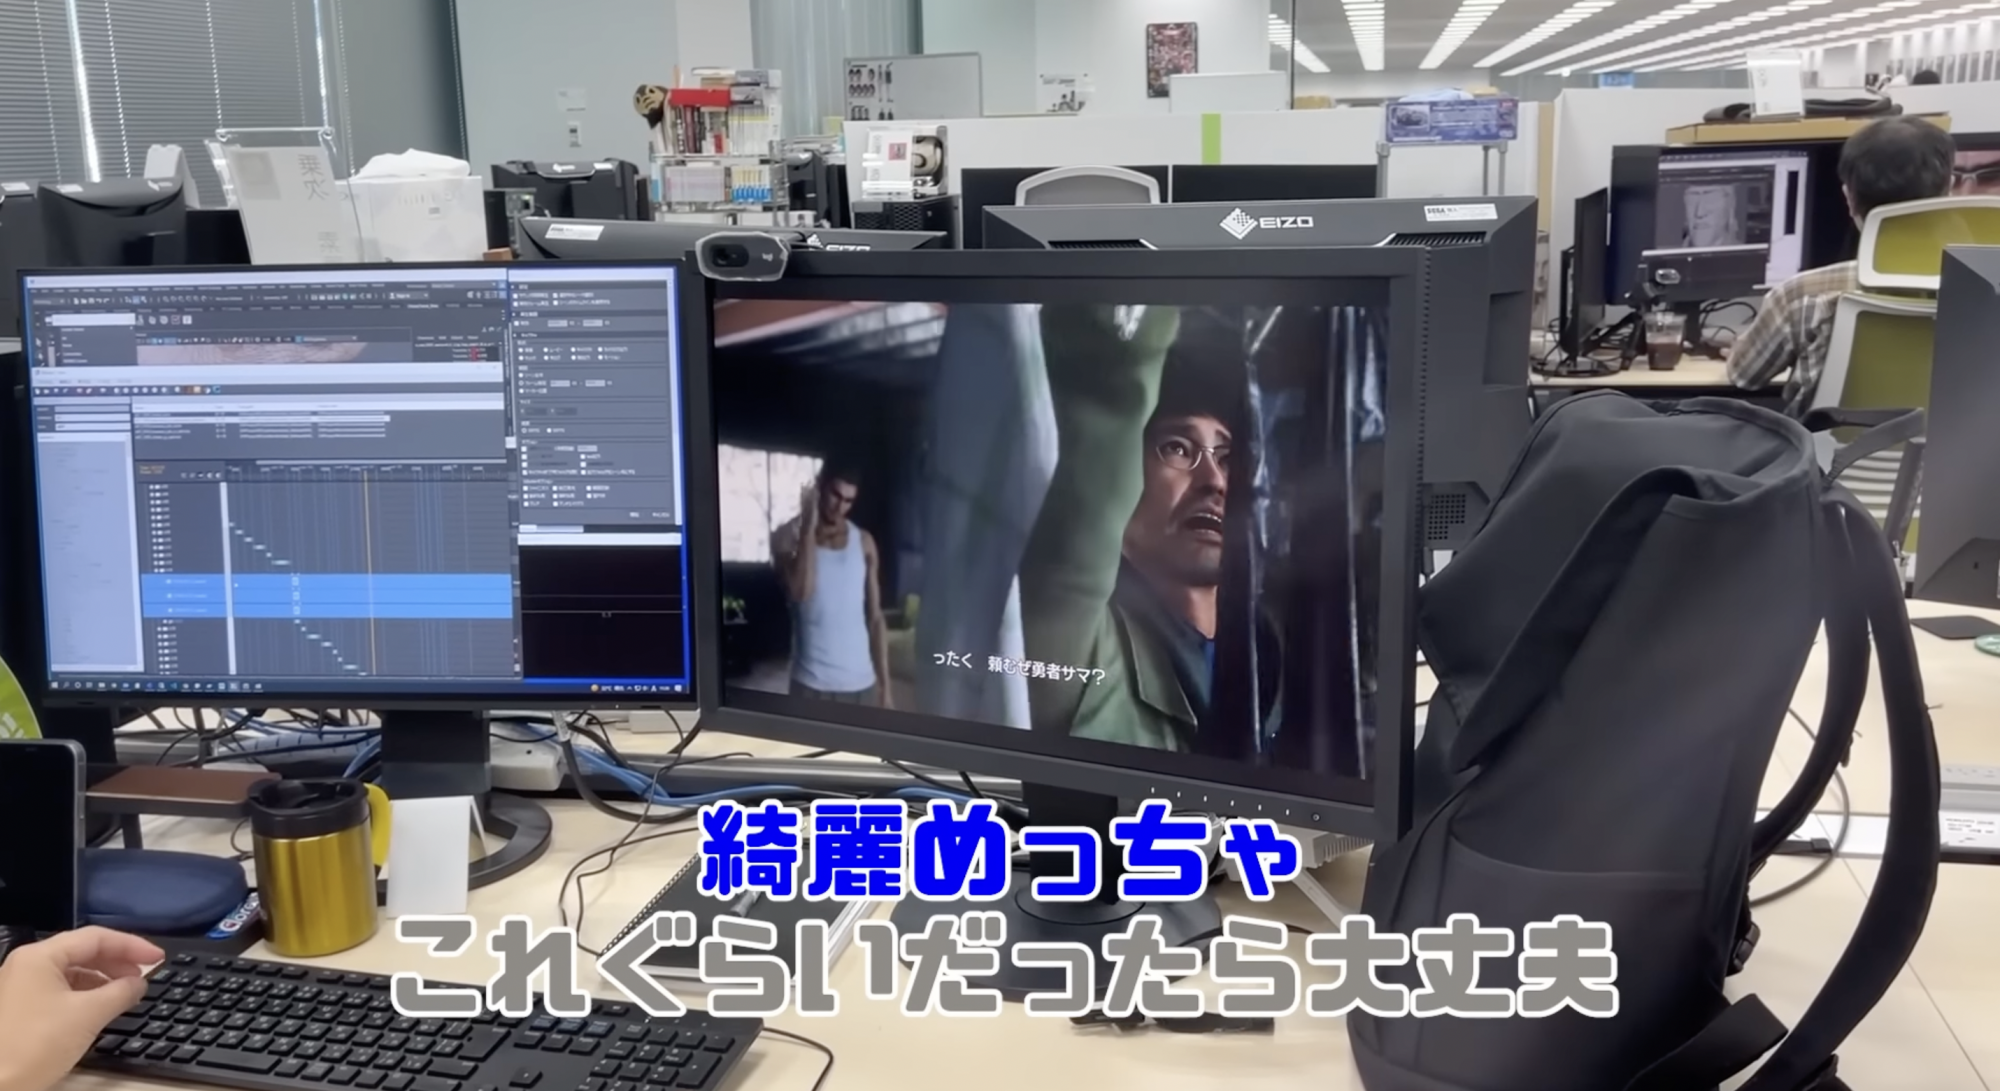 Yakuza: First Look at New Series Part in Studio Tour Video - News